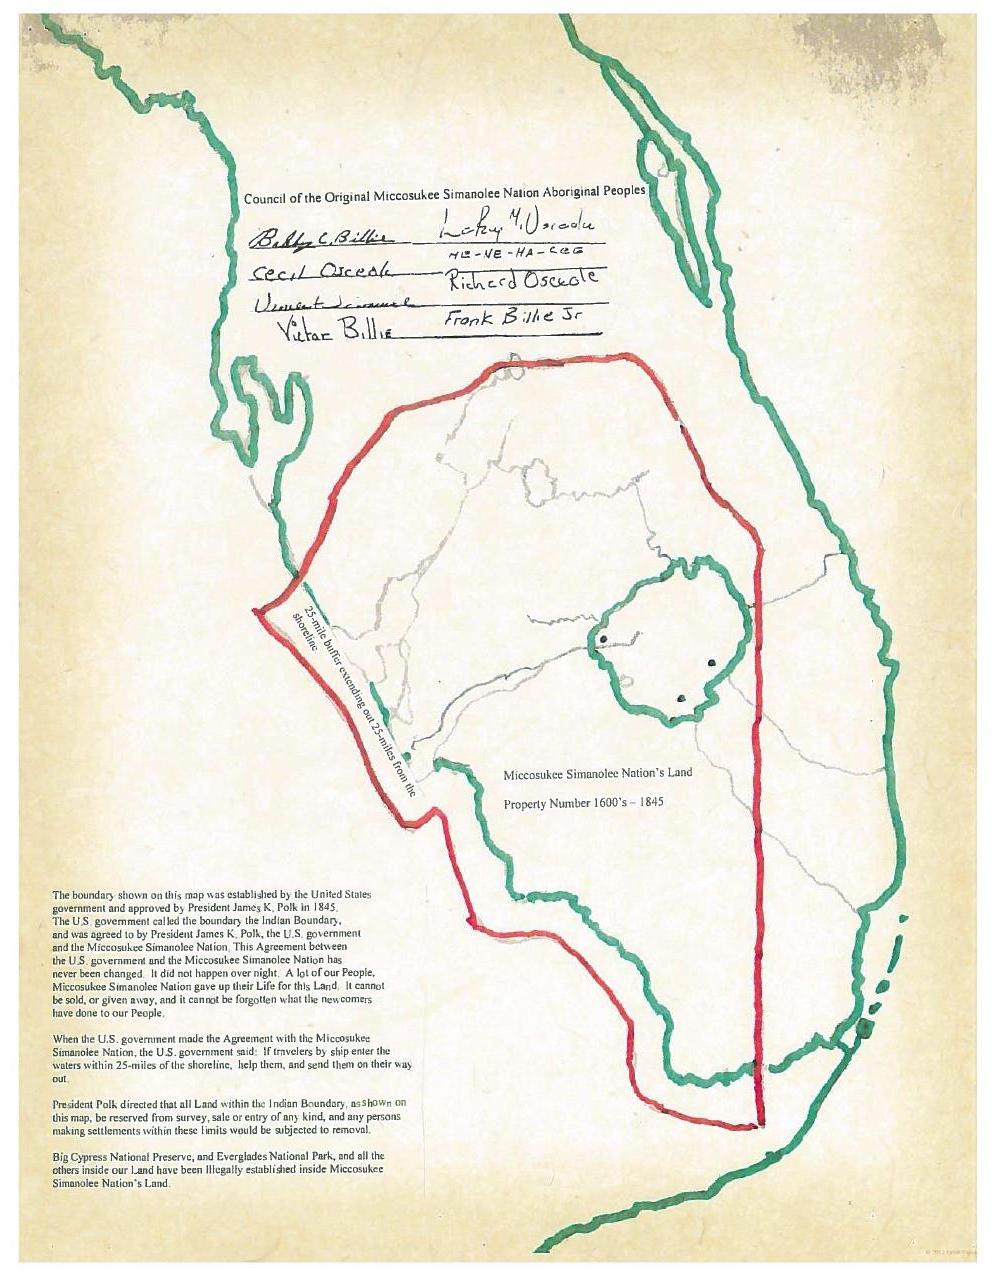 1000x1275 1845 Indian Boundary, in Council of the Original Miccosukee Simanolee Nation, by John S. Quarterman, for SpectraBusters.org, 21 November 2013